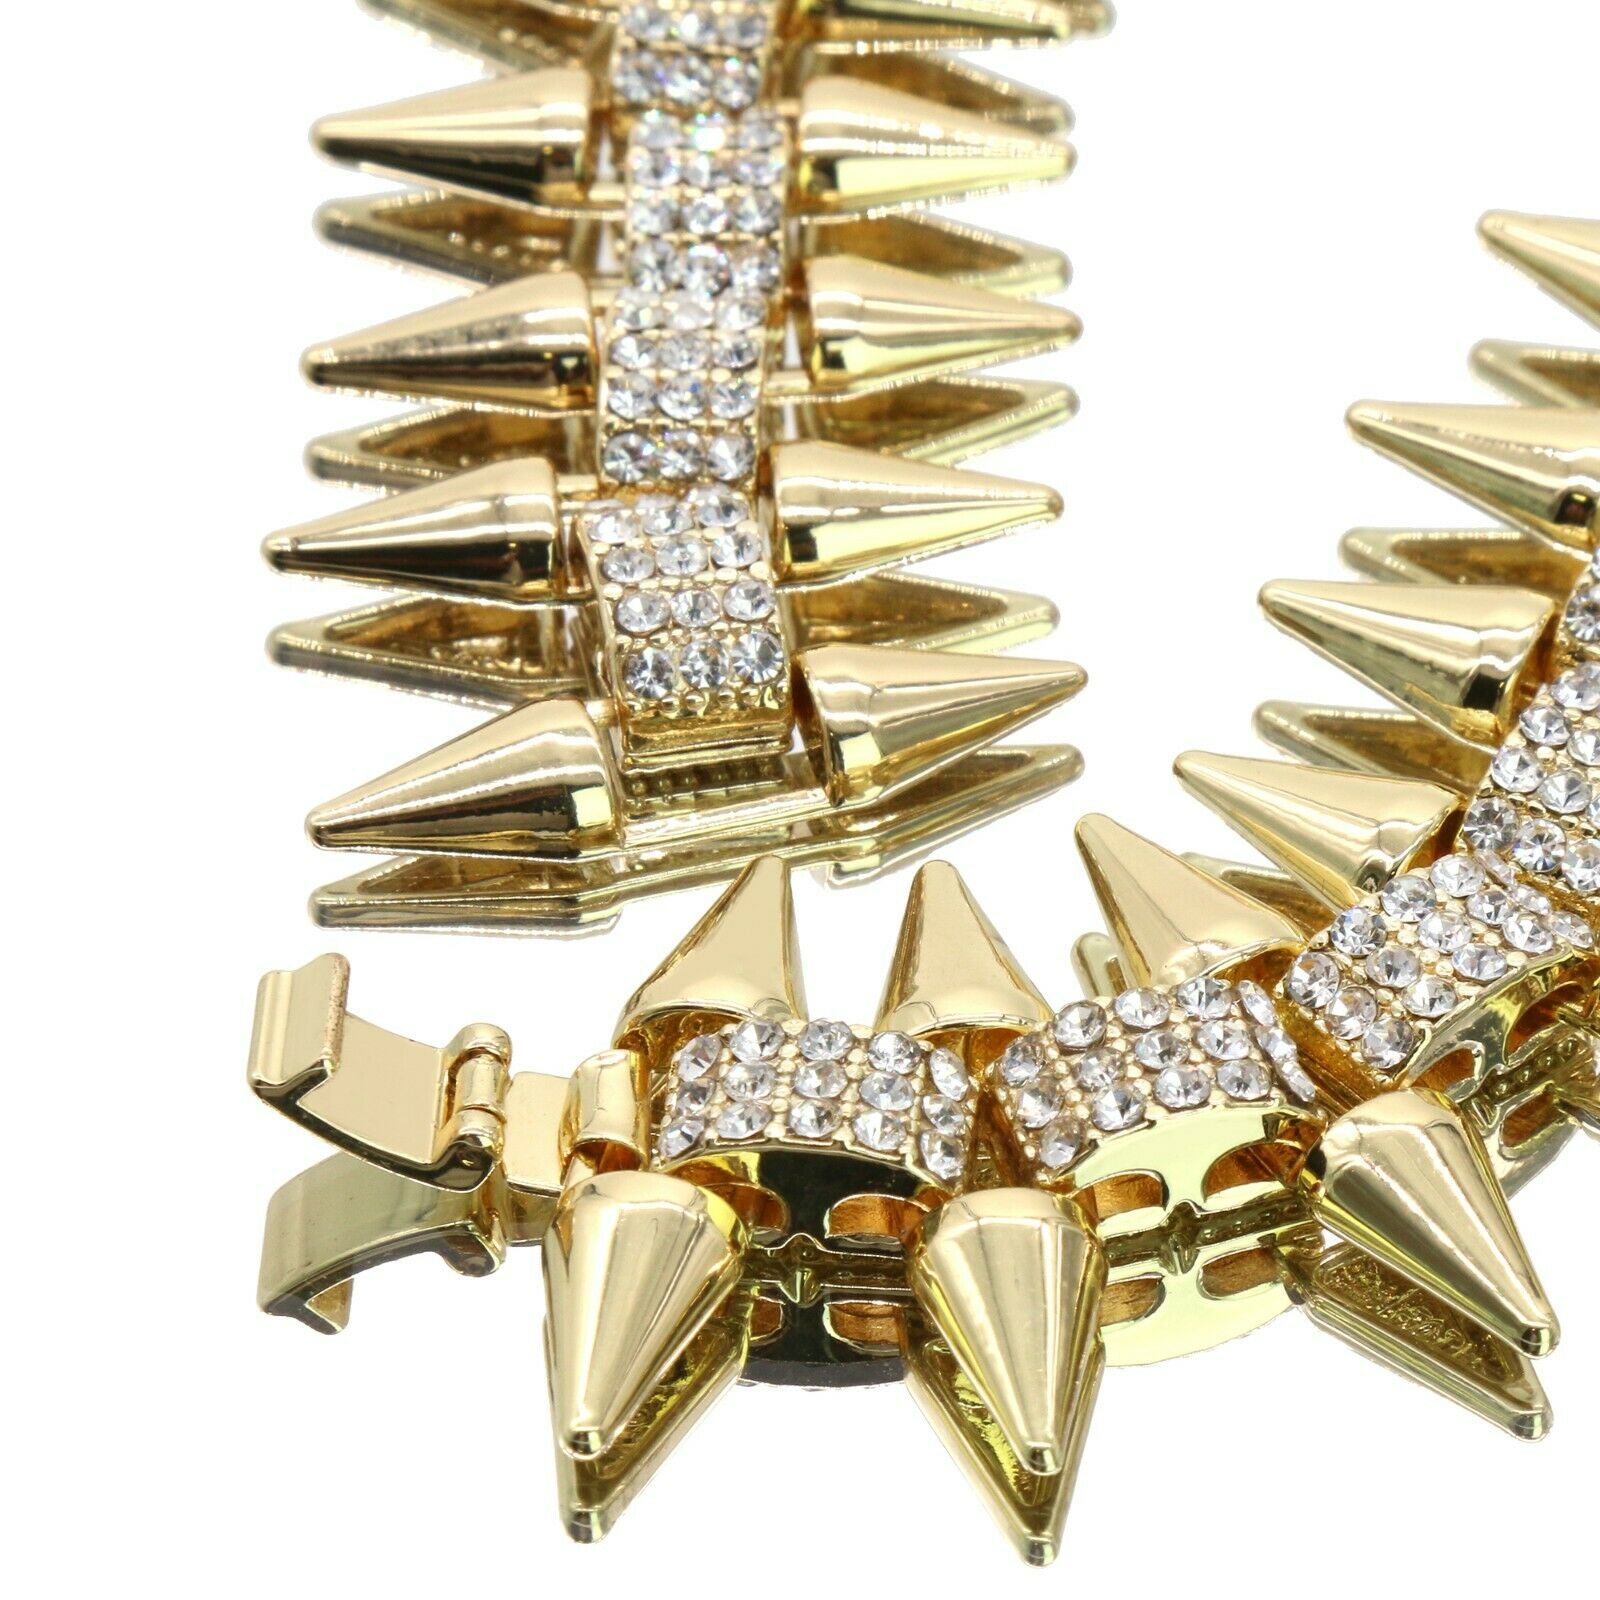 High Fashion Gold Plated AAA Spiky Tennis Chains & Cz Cactus Desert Jakh Pendant